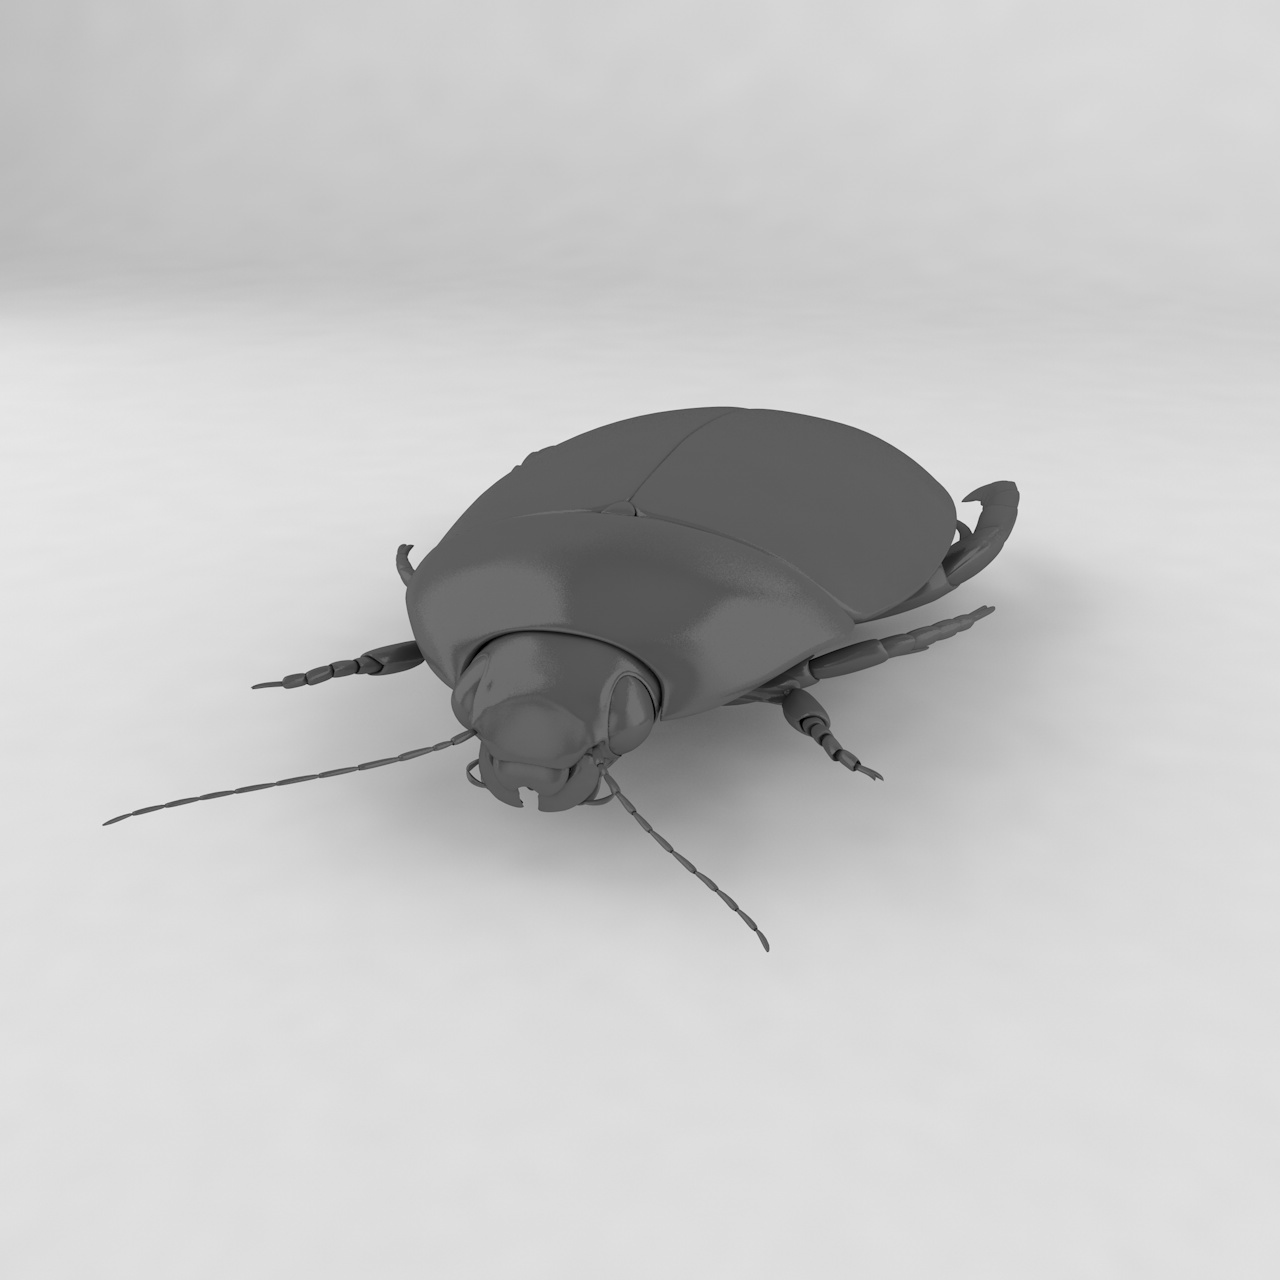 Cybister japonicus insect beetless 3d model